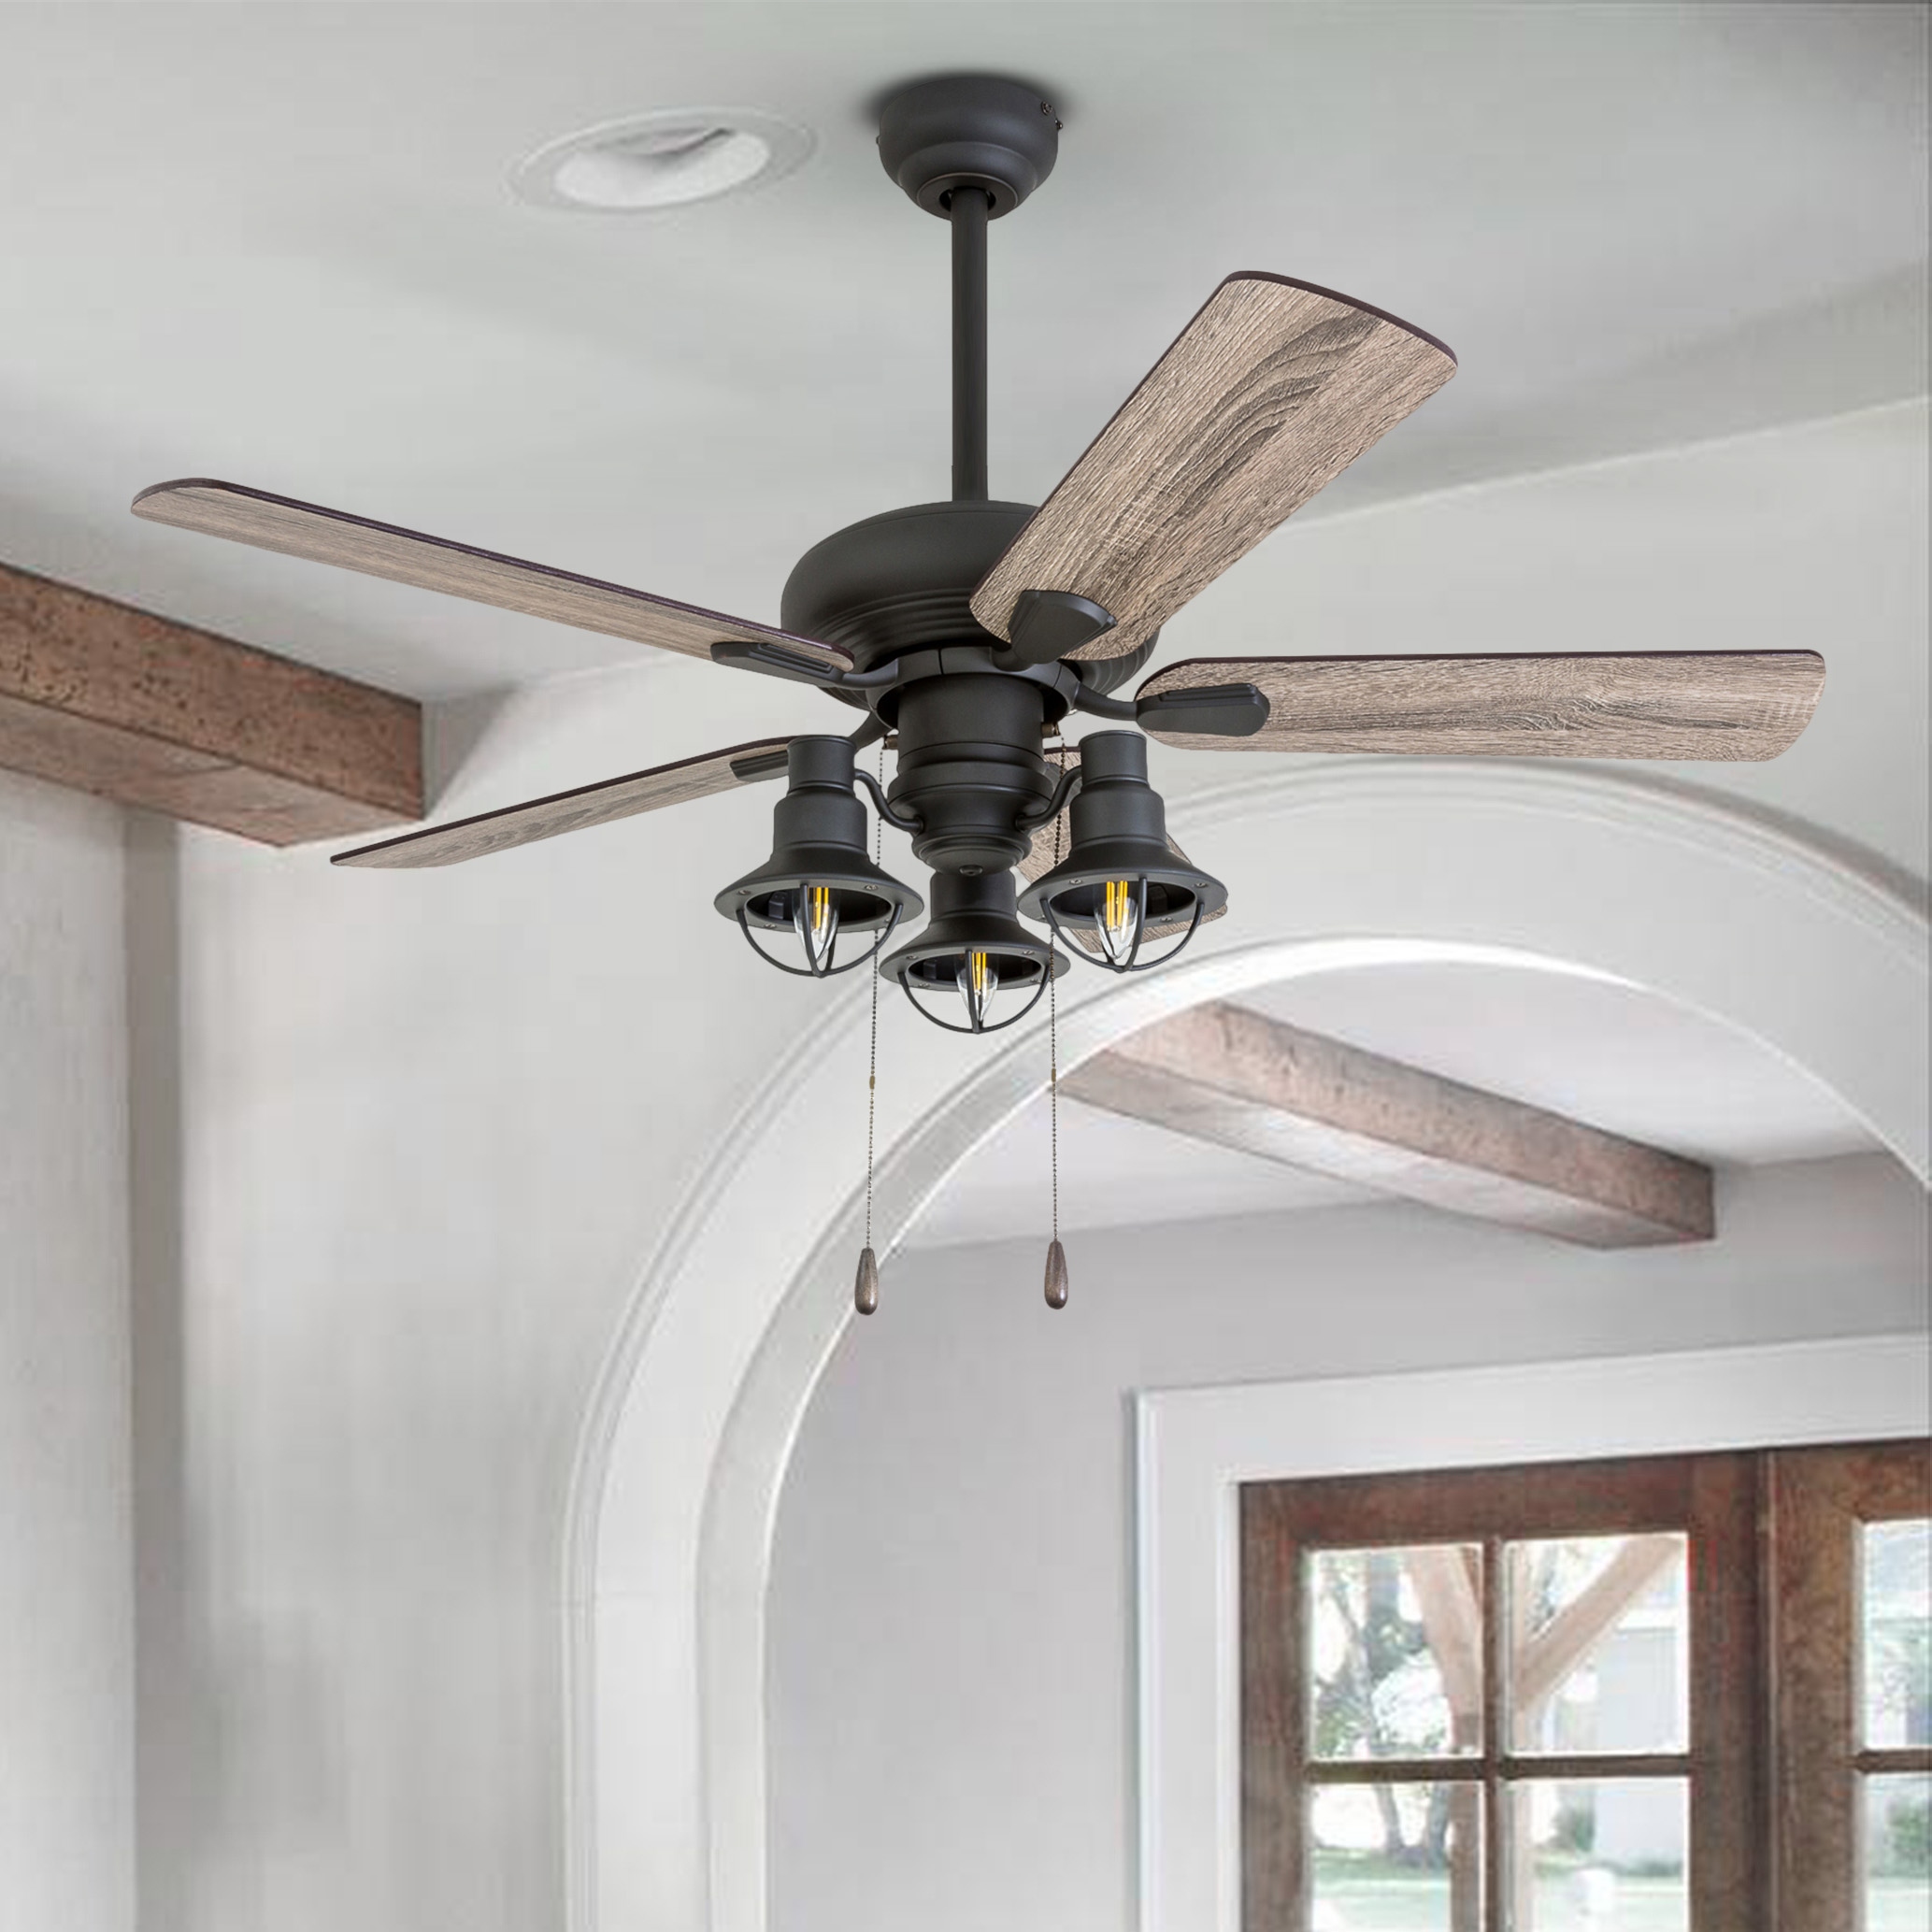 Prominence Home Piercy Coastal 42-inch Aged Bronze LED Ceiling Fan ...